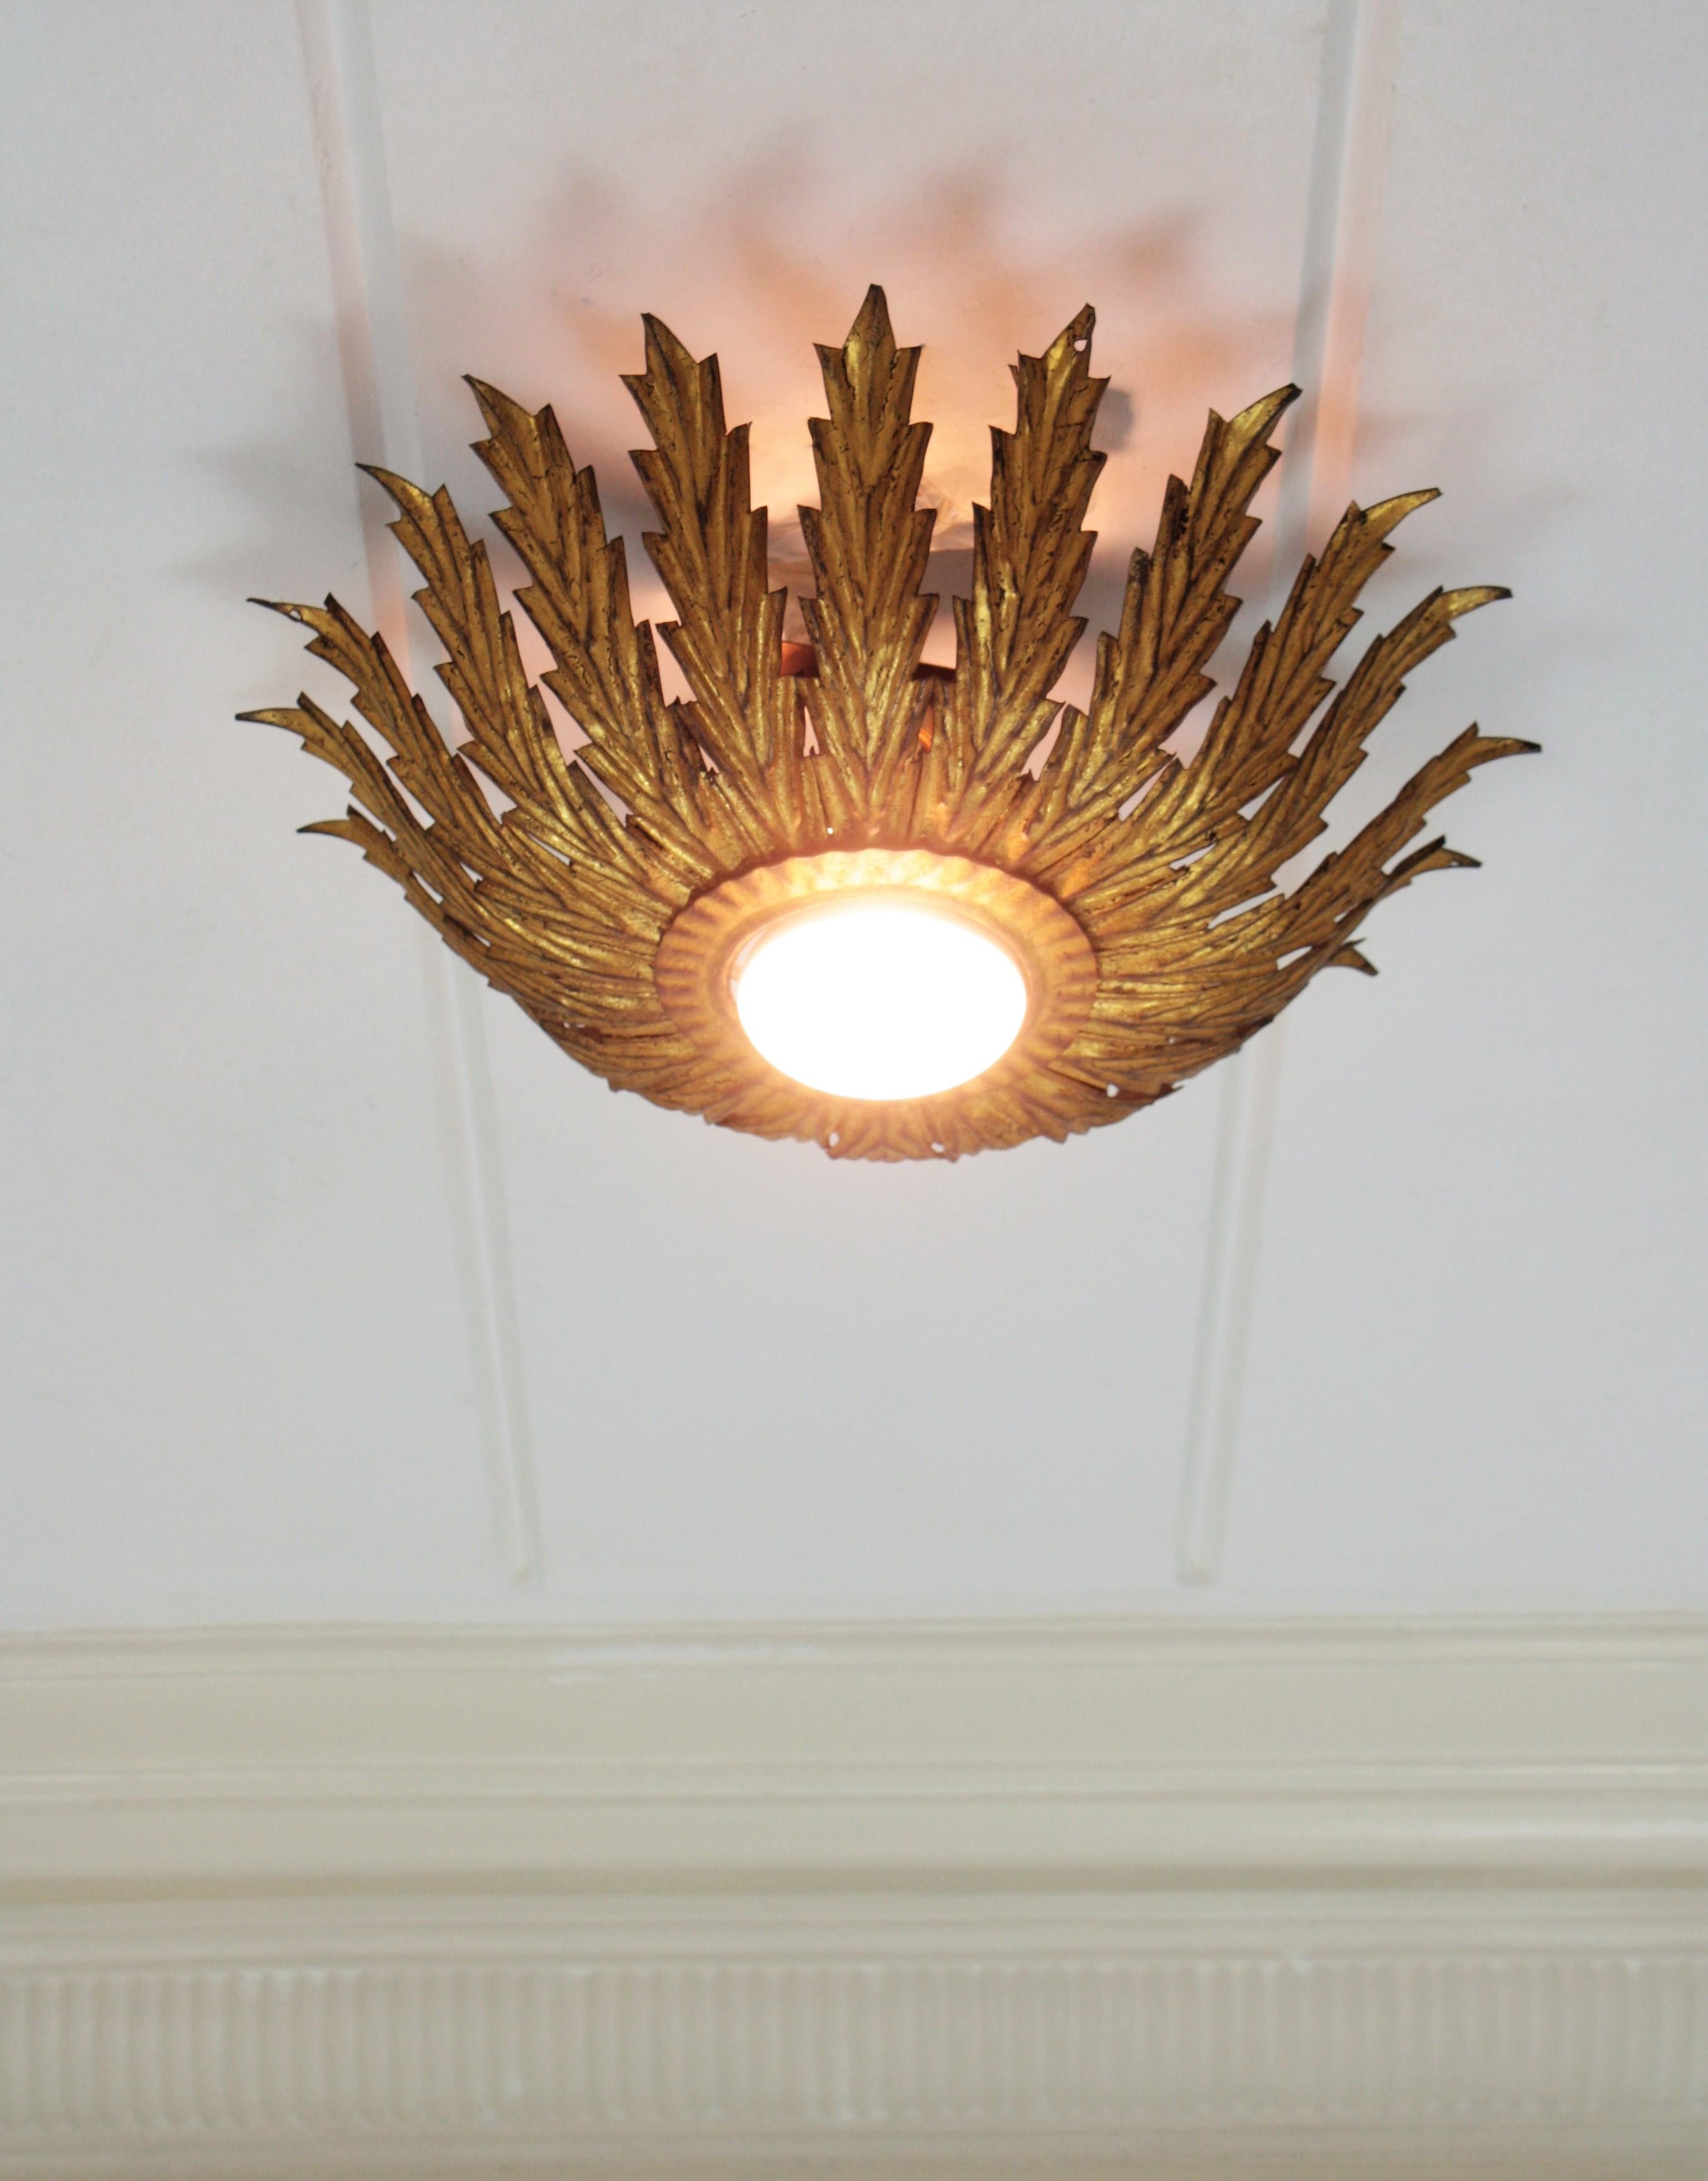 French Sunburst Light Fixture with Scalloped Leaves, Gilt Iron,  1950s For Sale 3